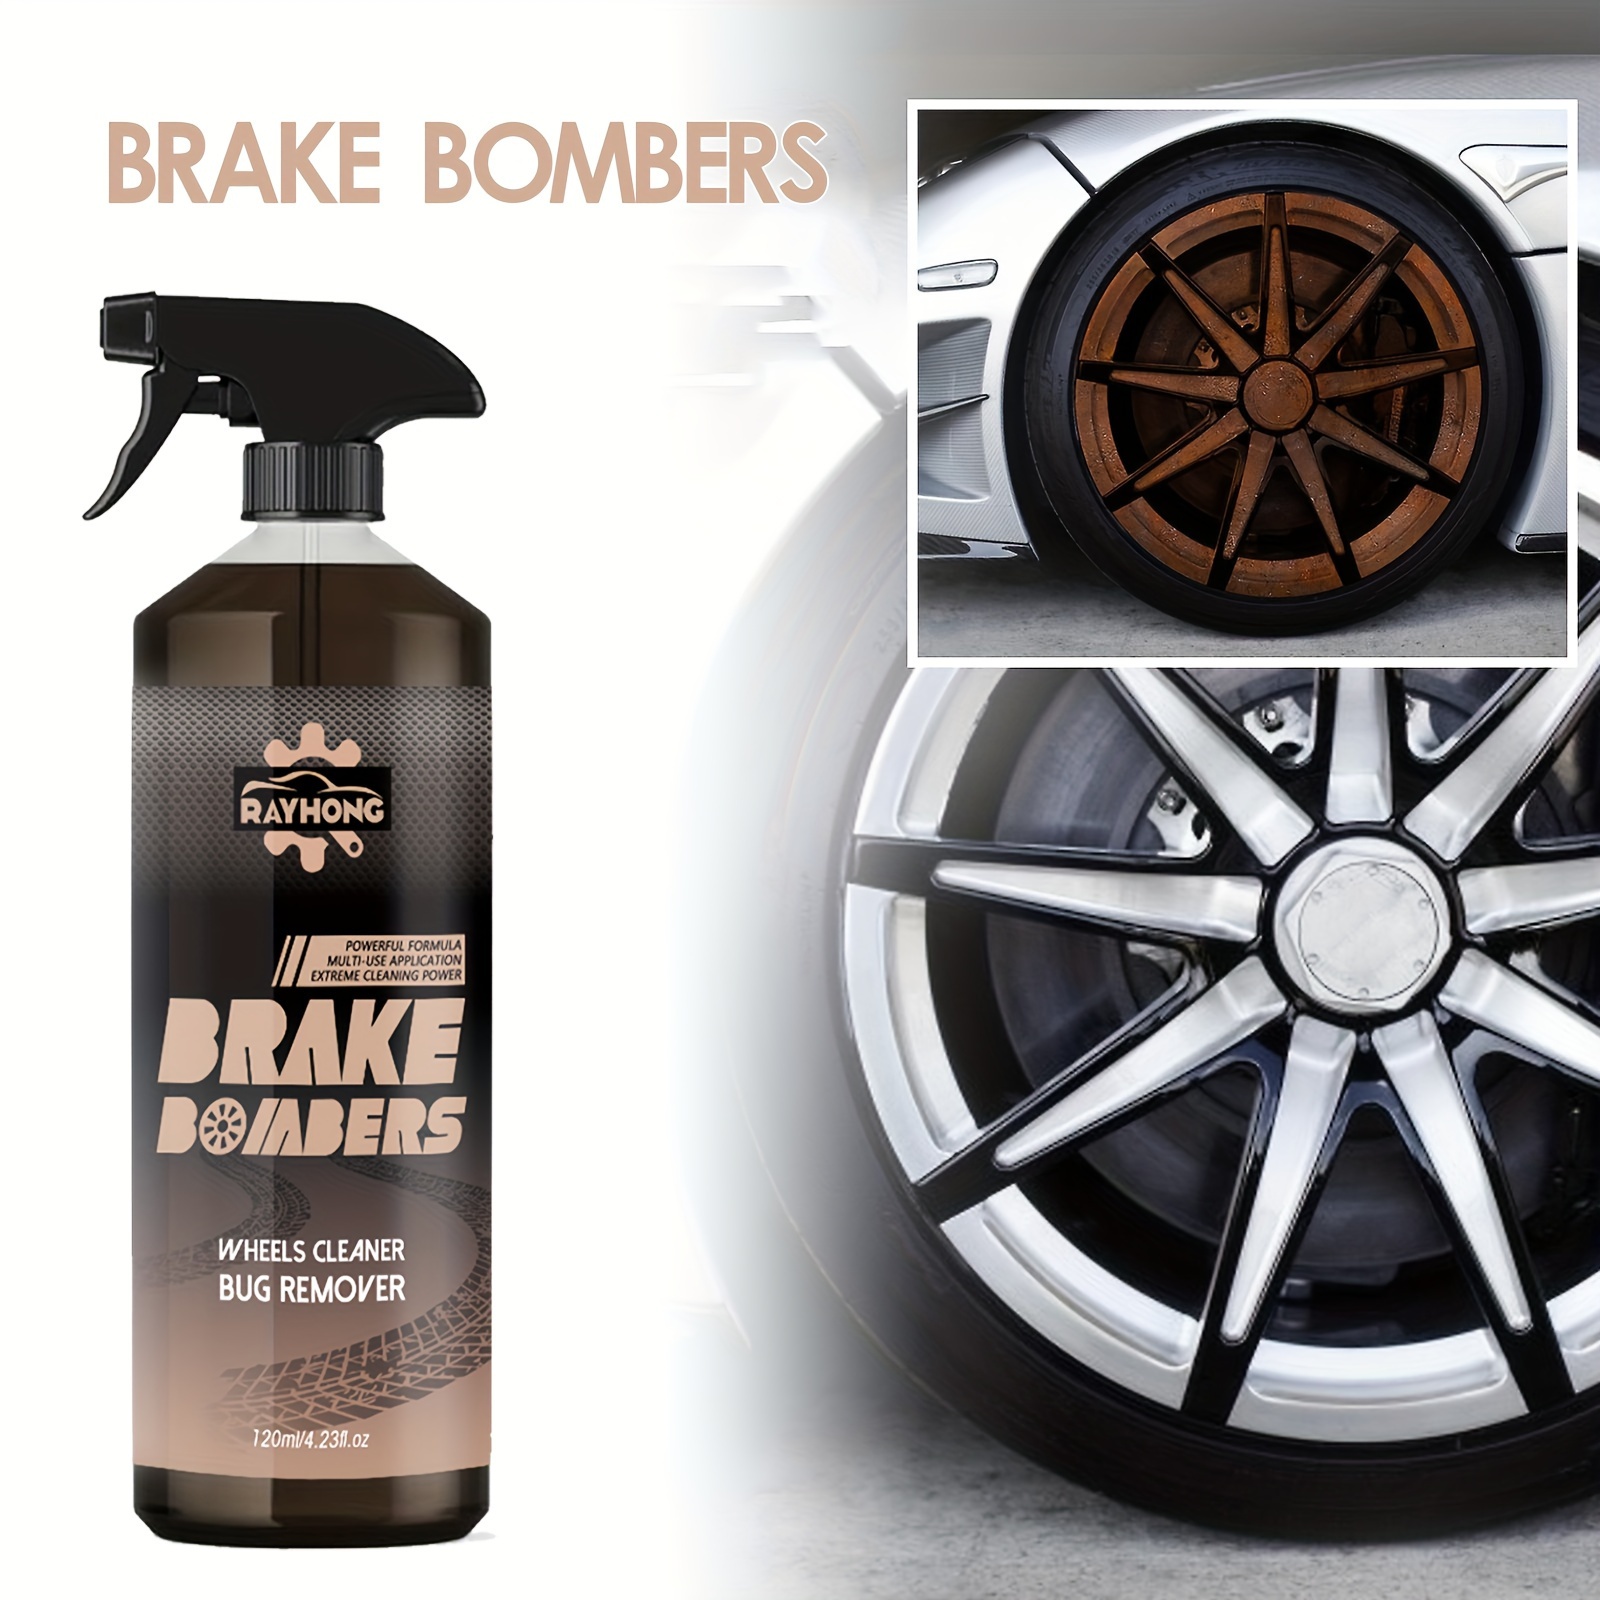 Brake Bomber 100ml Car Stain Remover Cleaner Spray Agent with